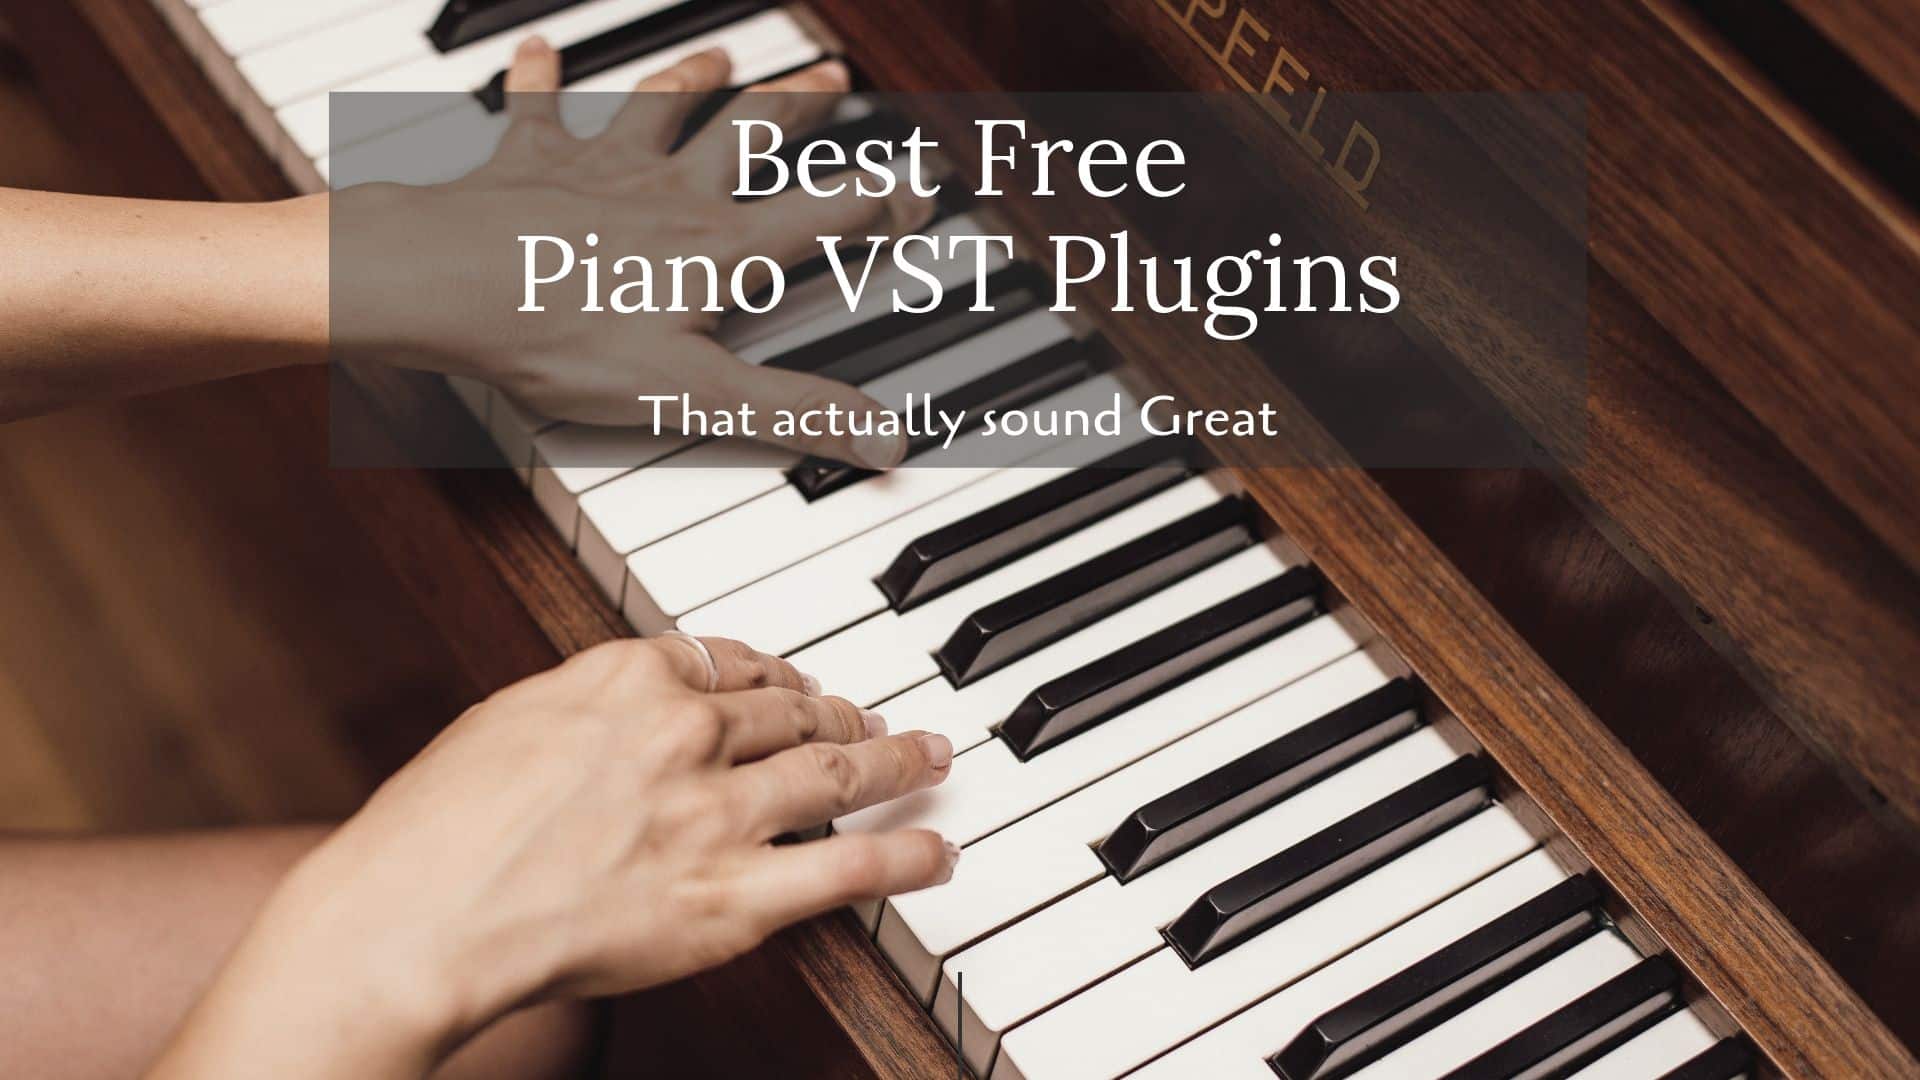 labs soft piano vst download